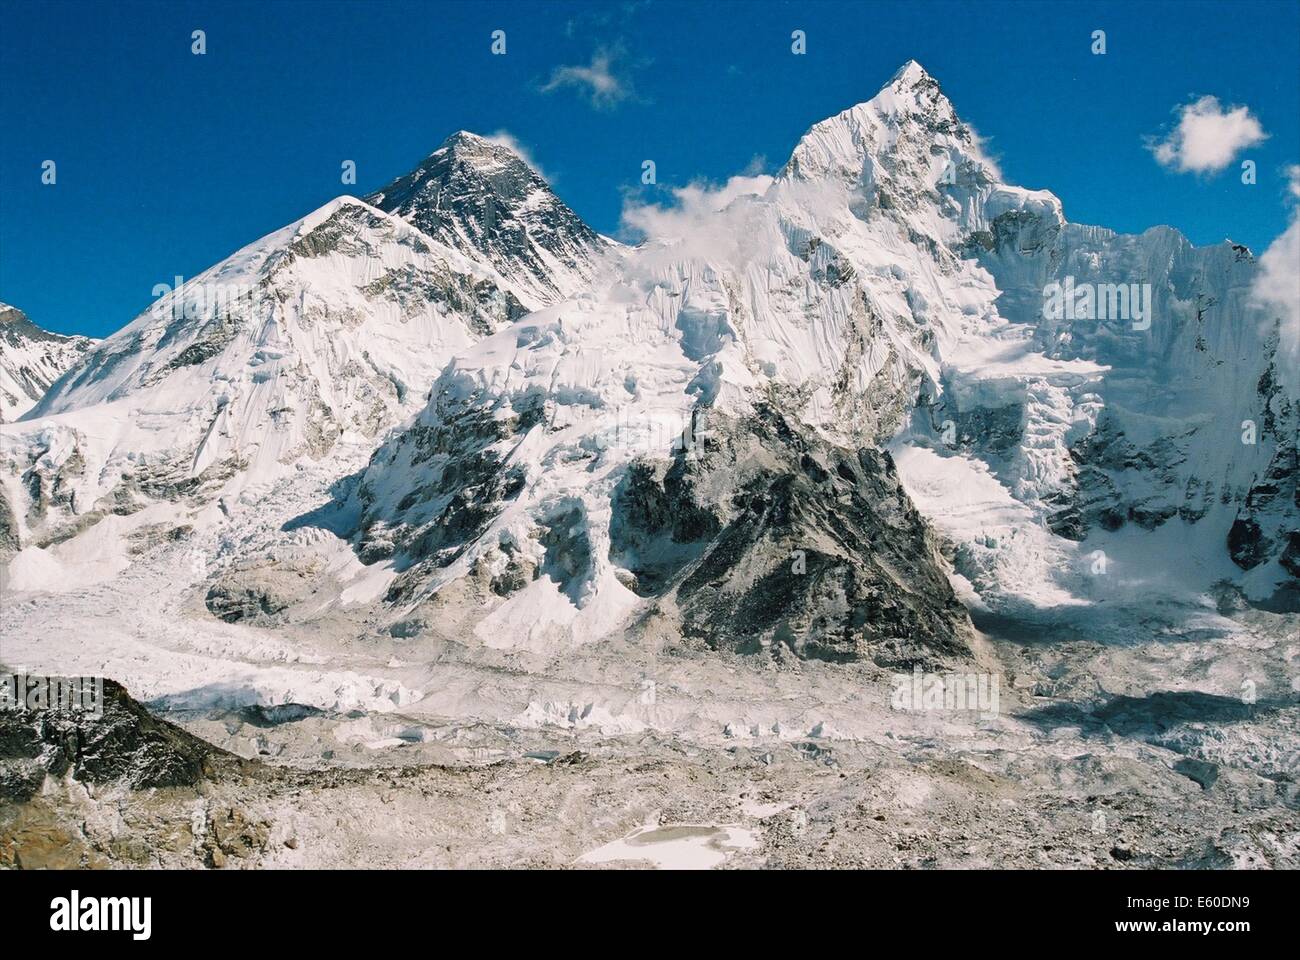 Mount Everest, the worlds highest peak at 8885 masl, as seen from the Khumbu Valley, Nepalese Himalayas Stock Photo